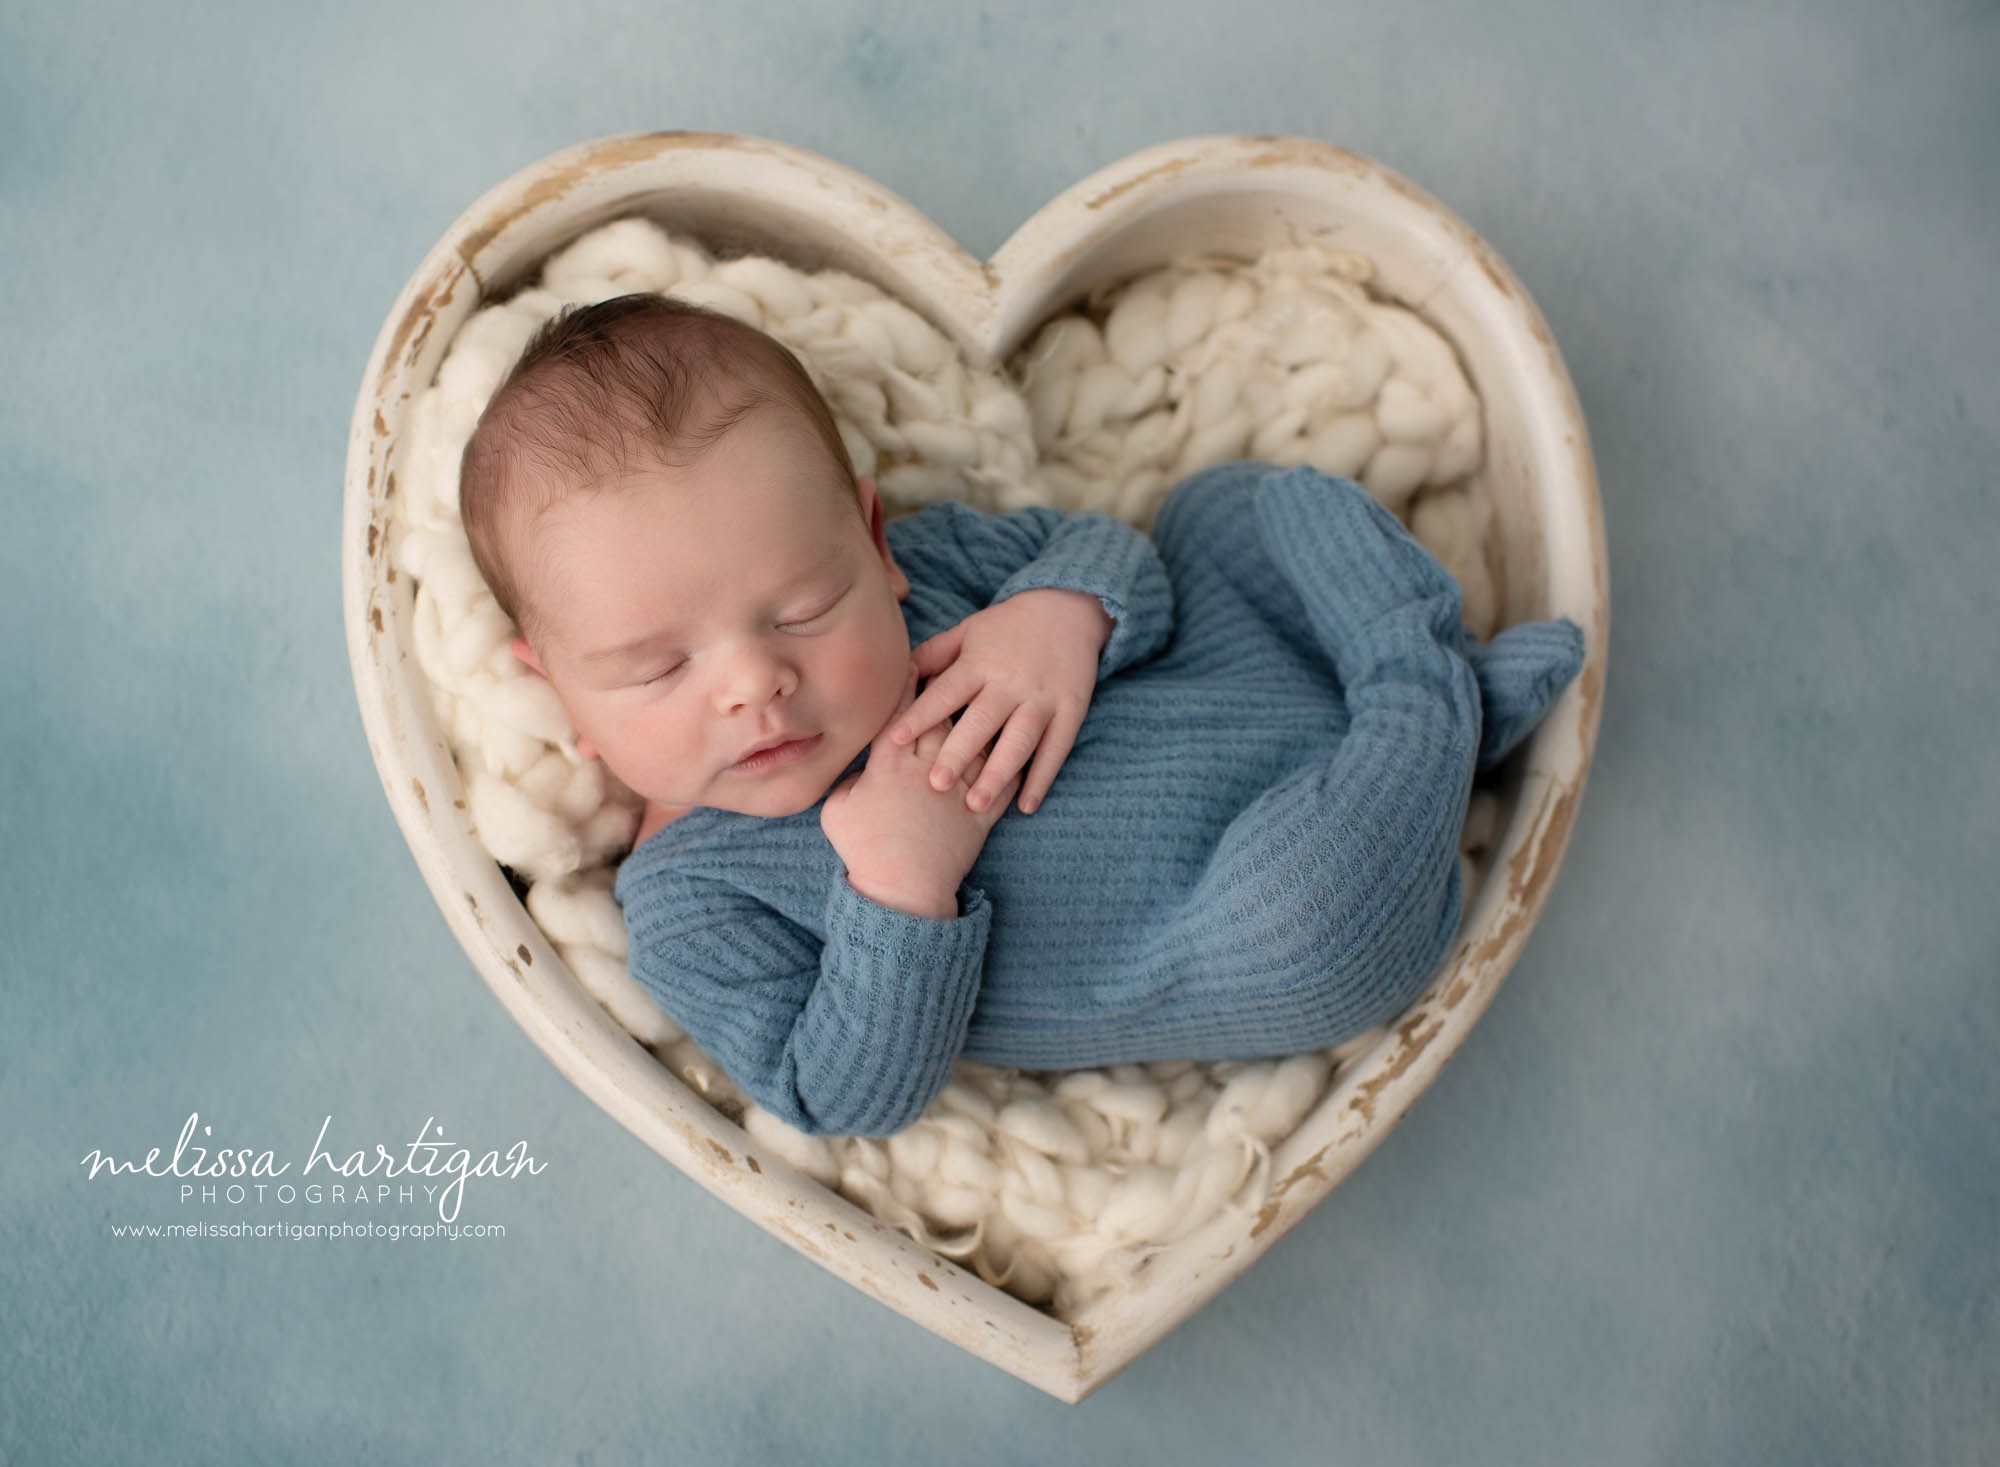 newborn baby boy wearing blue outfit posed in cream wooden heart bowl prop with cream fluff CT maternity newborn photographer